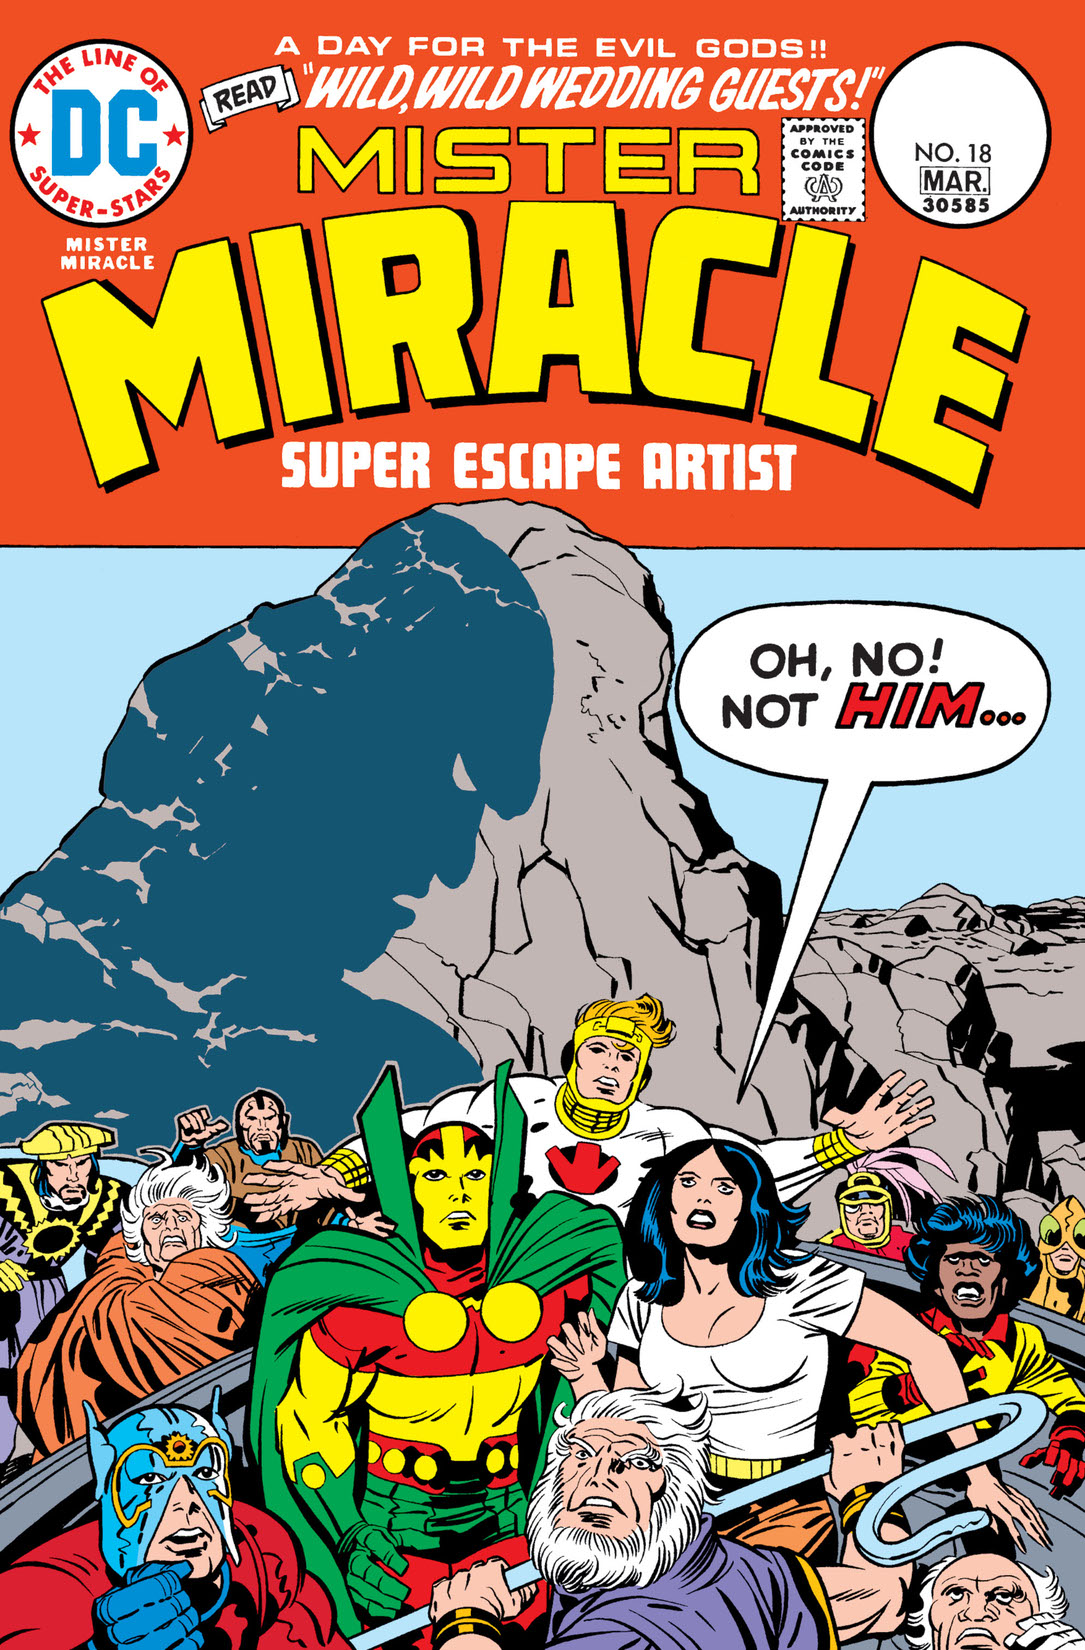 Mister Miracle (1971-) #18 preview images